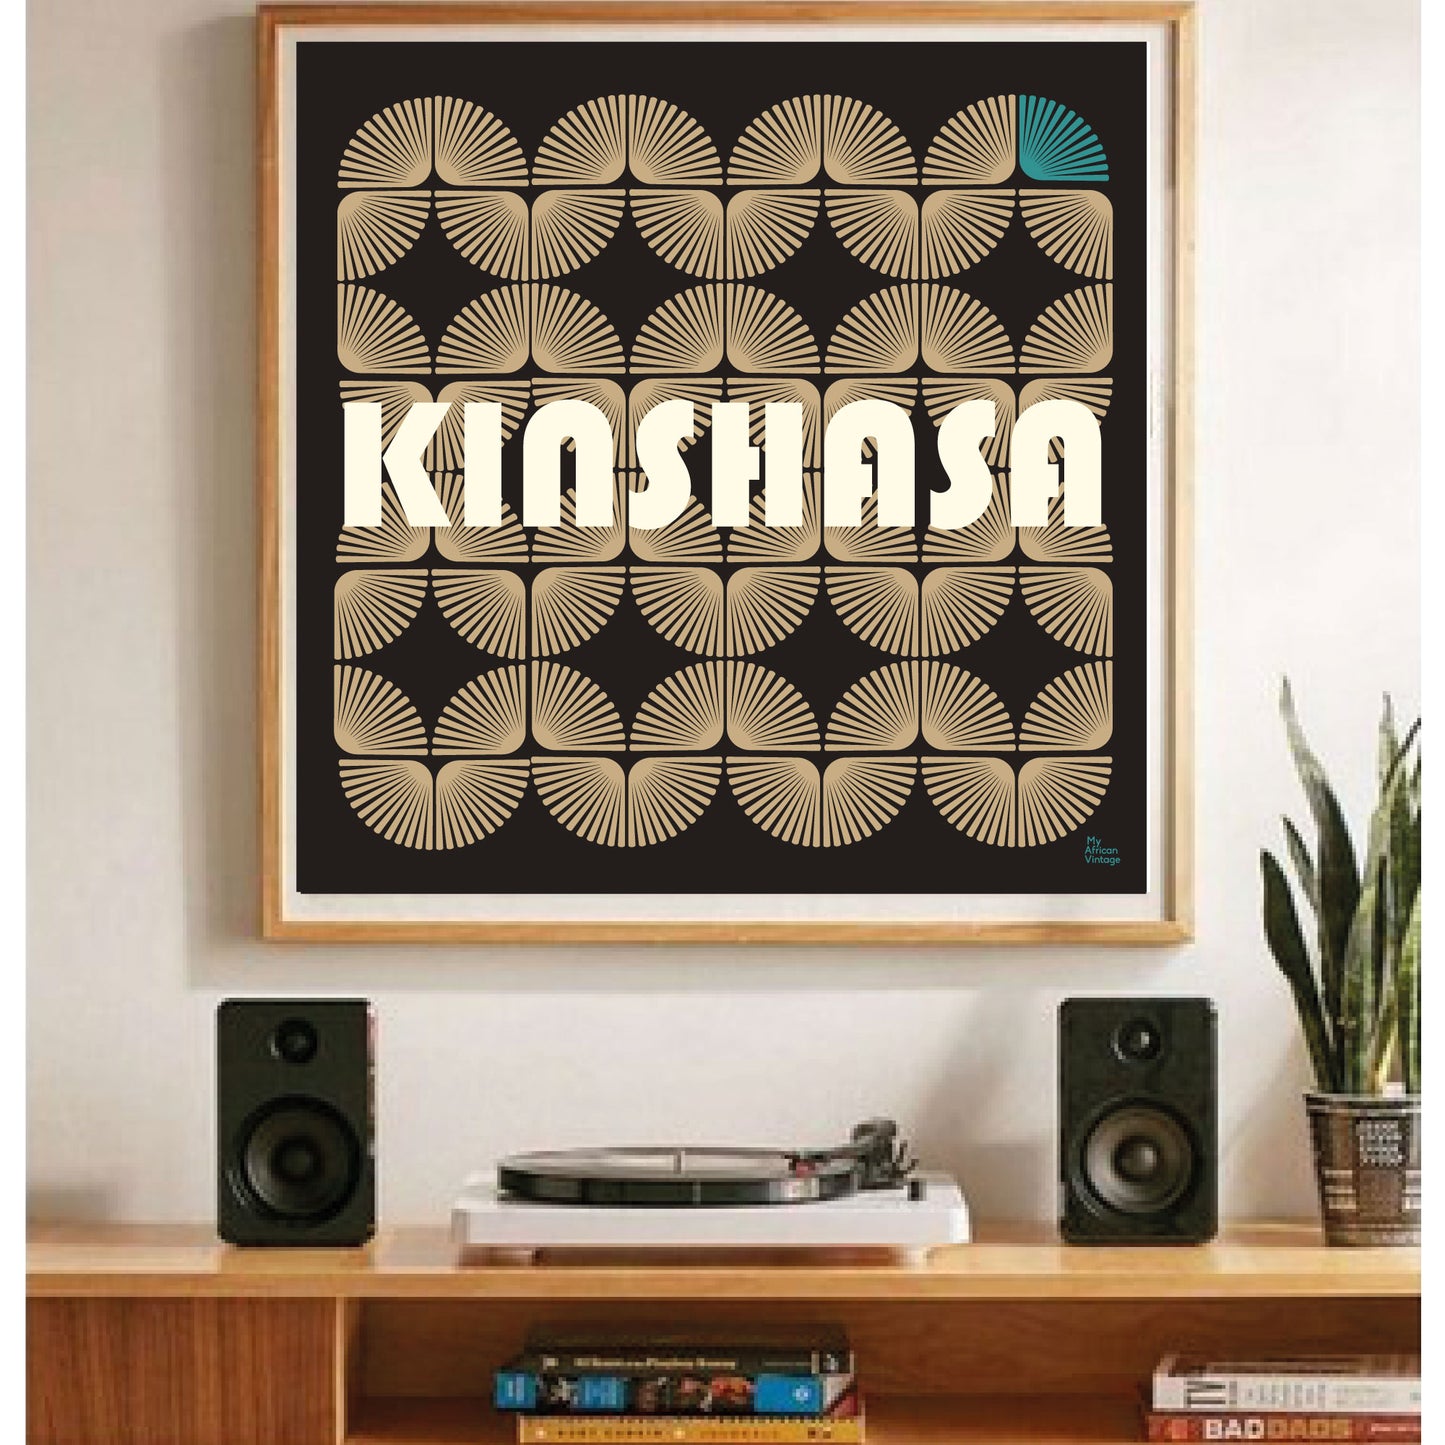 "Kinshasa" retro style poster - "My African Vintage" collection